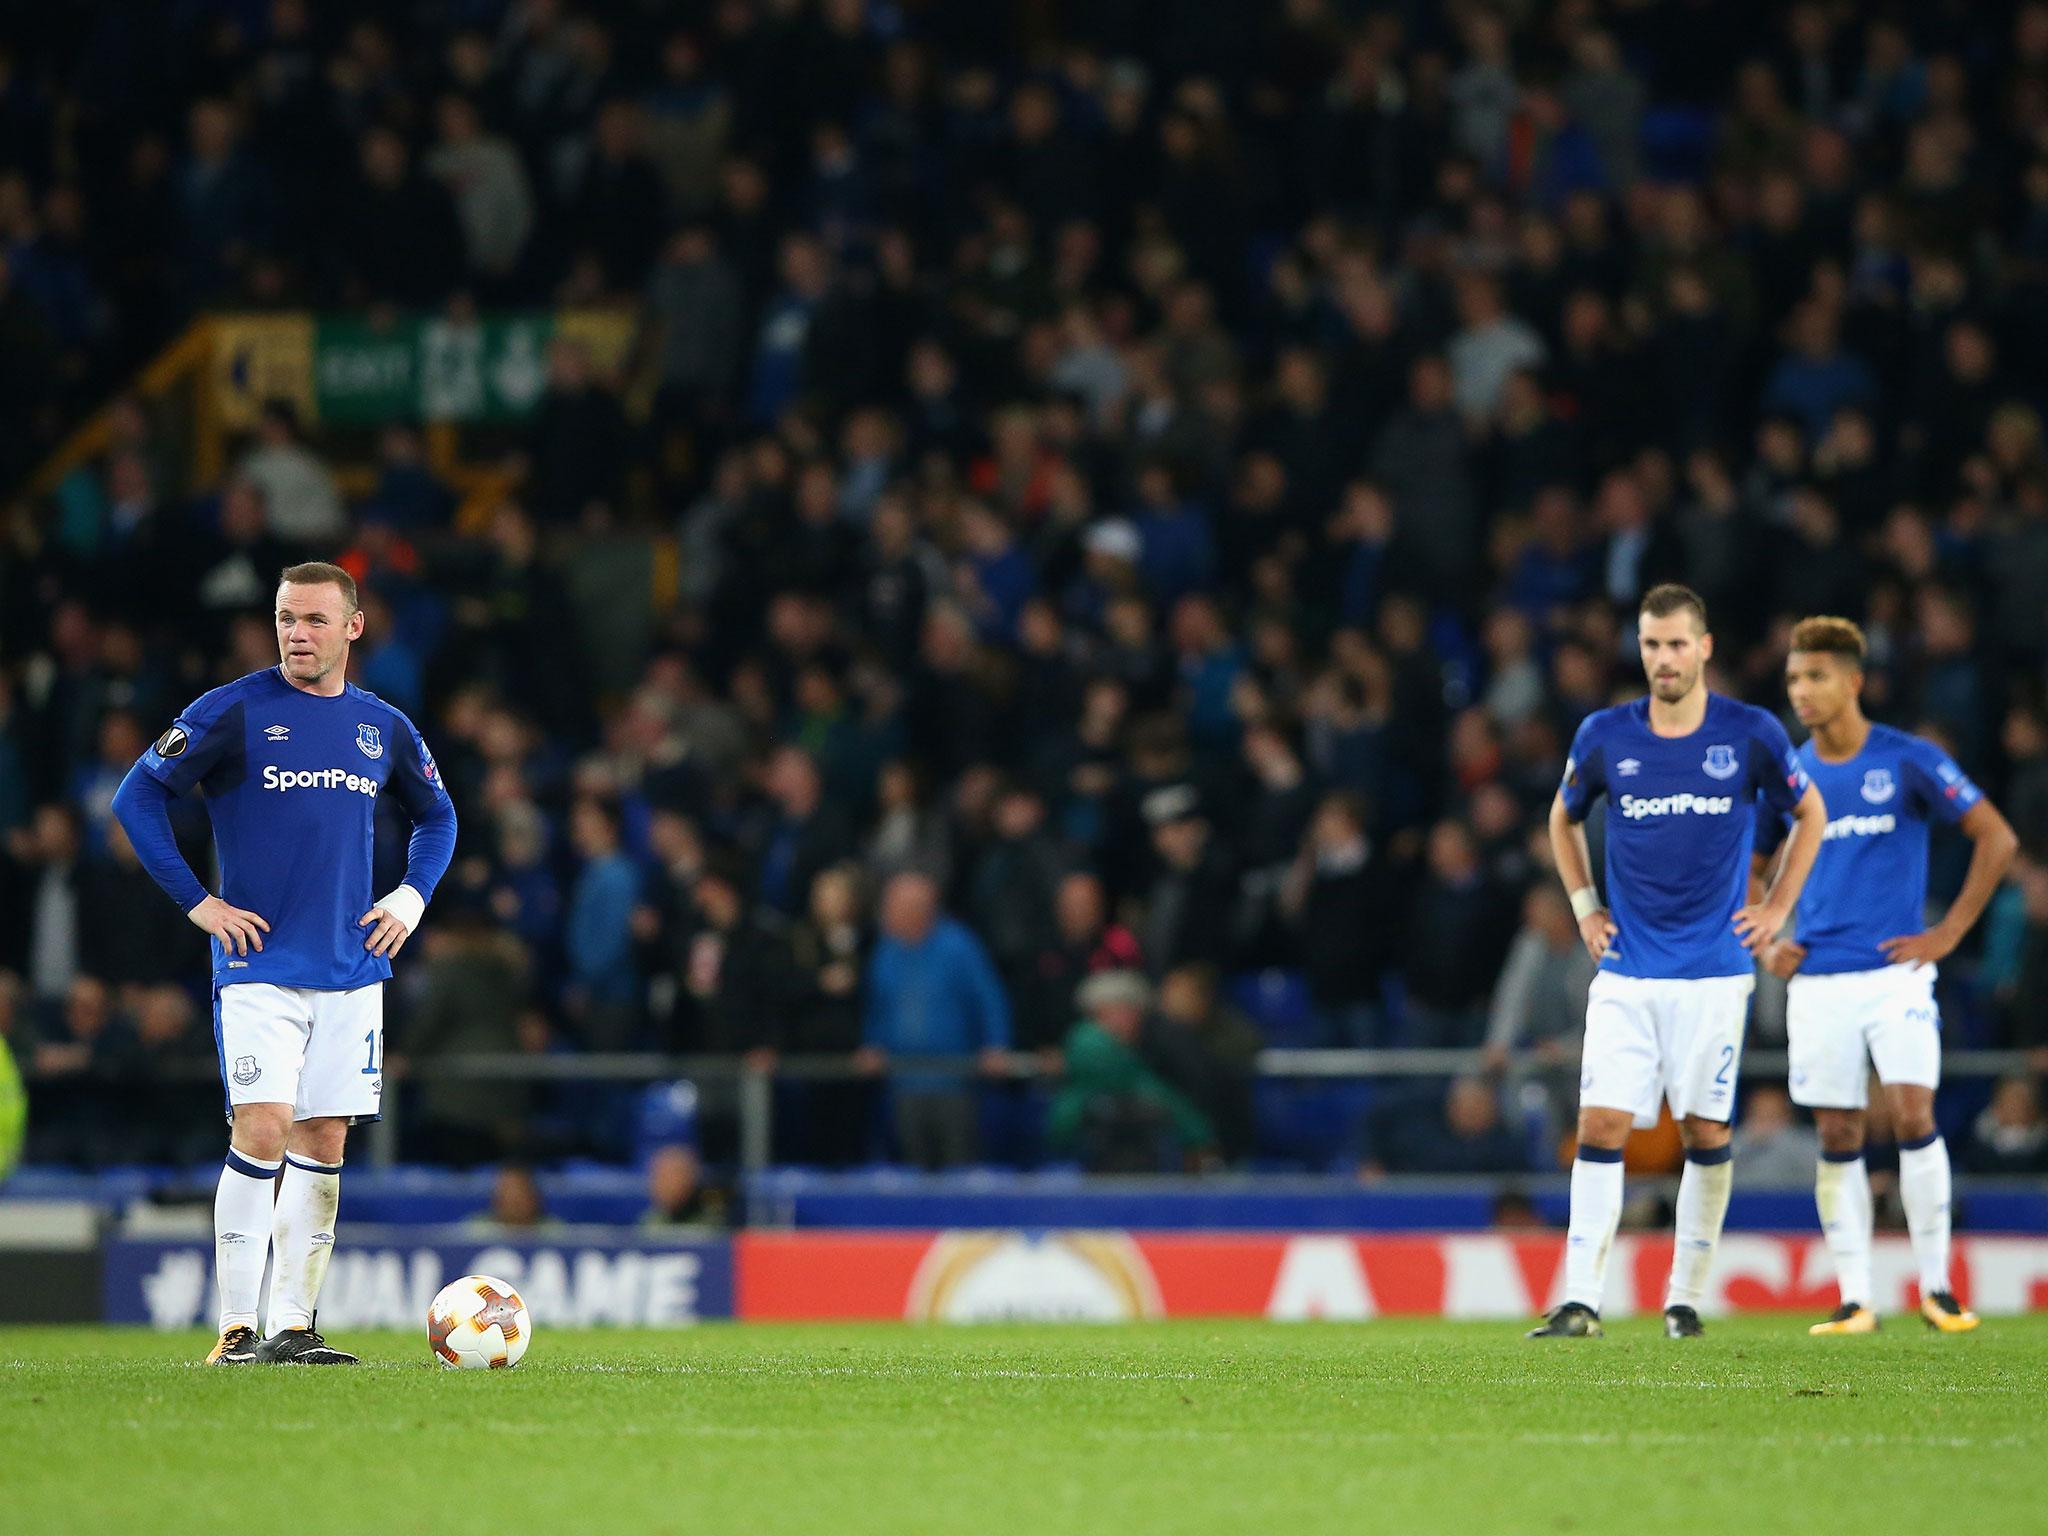 Despite the club's summer splurge, Everton have looked directionless this season